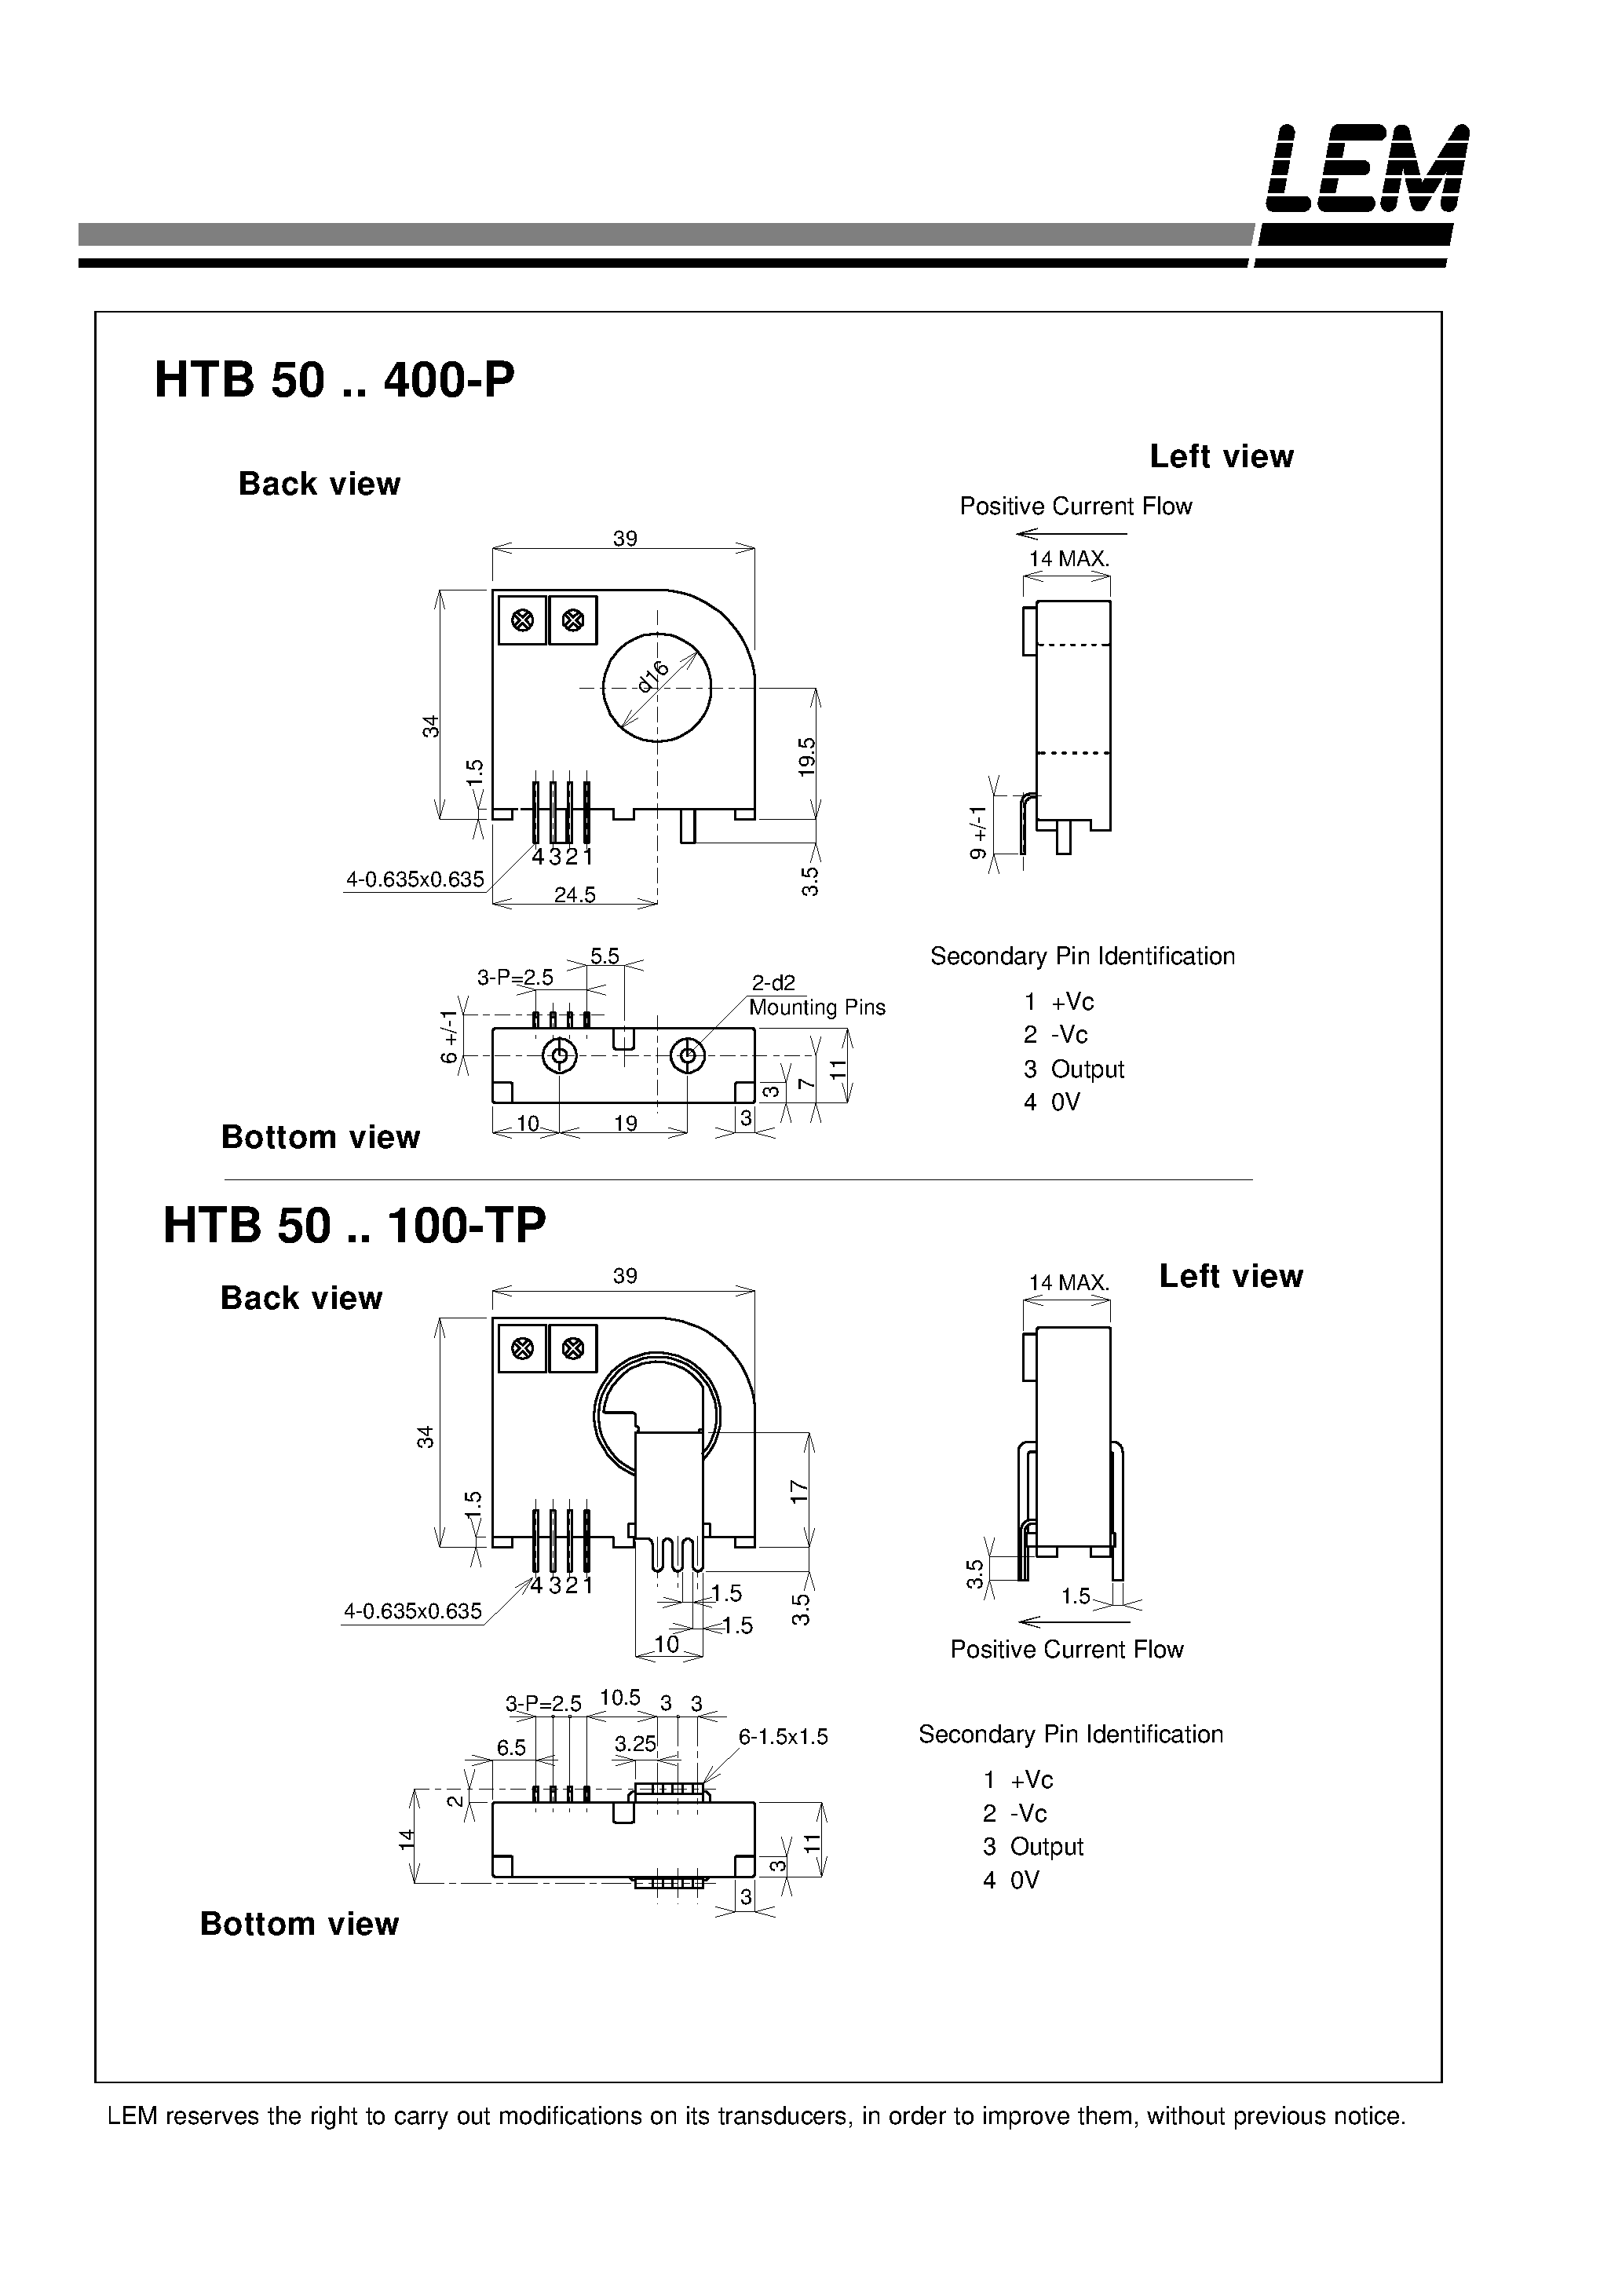 Datasheet HTB50-P - Current Transducers HTB 50~400-P and HTB 50~100-TP page 2